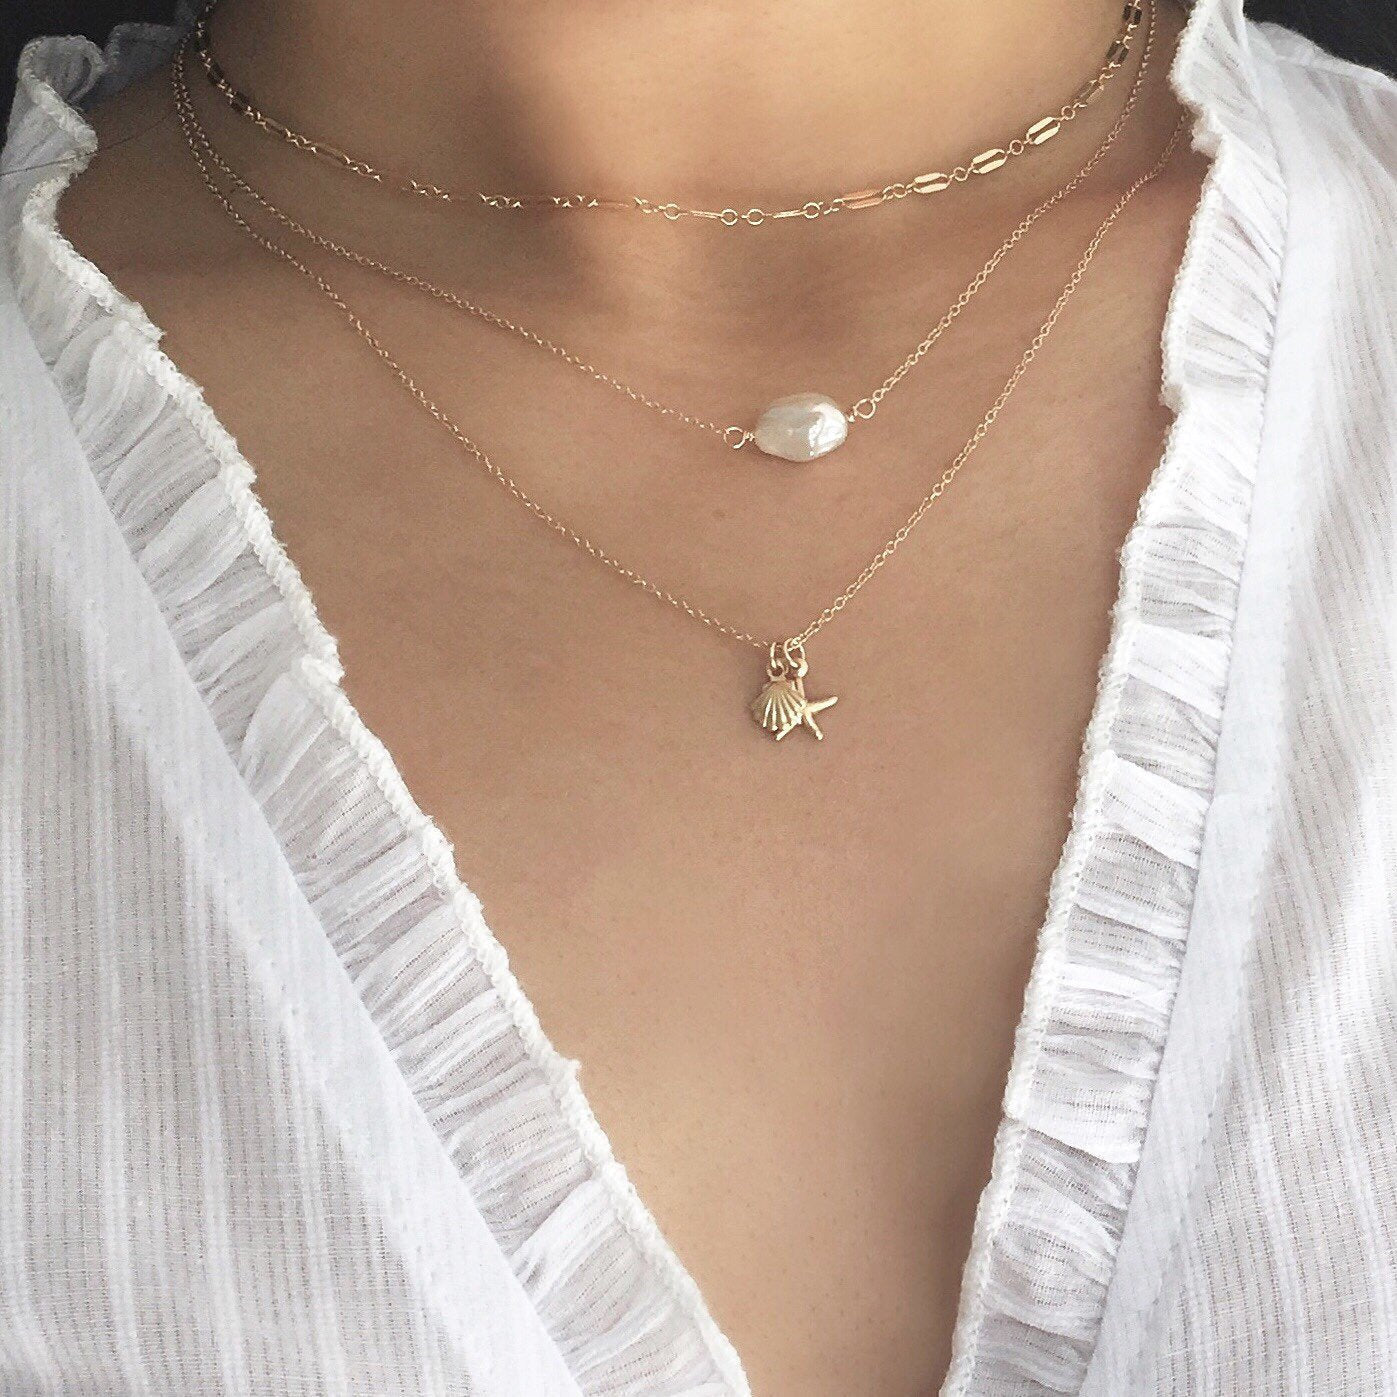 Single Pearl Necklace - Simple Pearl Necklace, Keshi Pearl Necklace, Freshwater Pearl Necklace, Real Pearl necklace, pearl choker |GFN00054